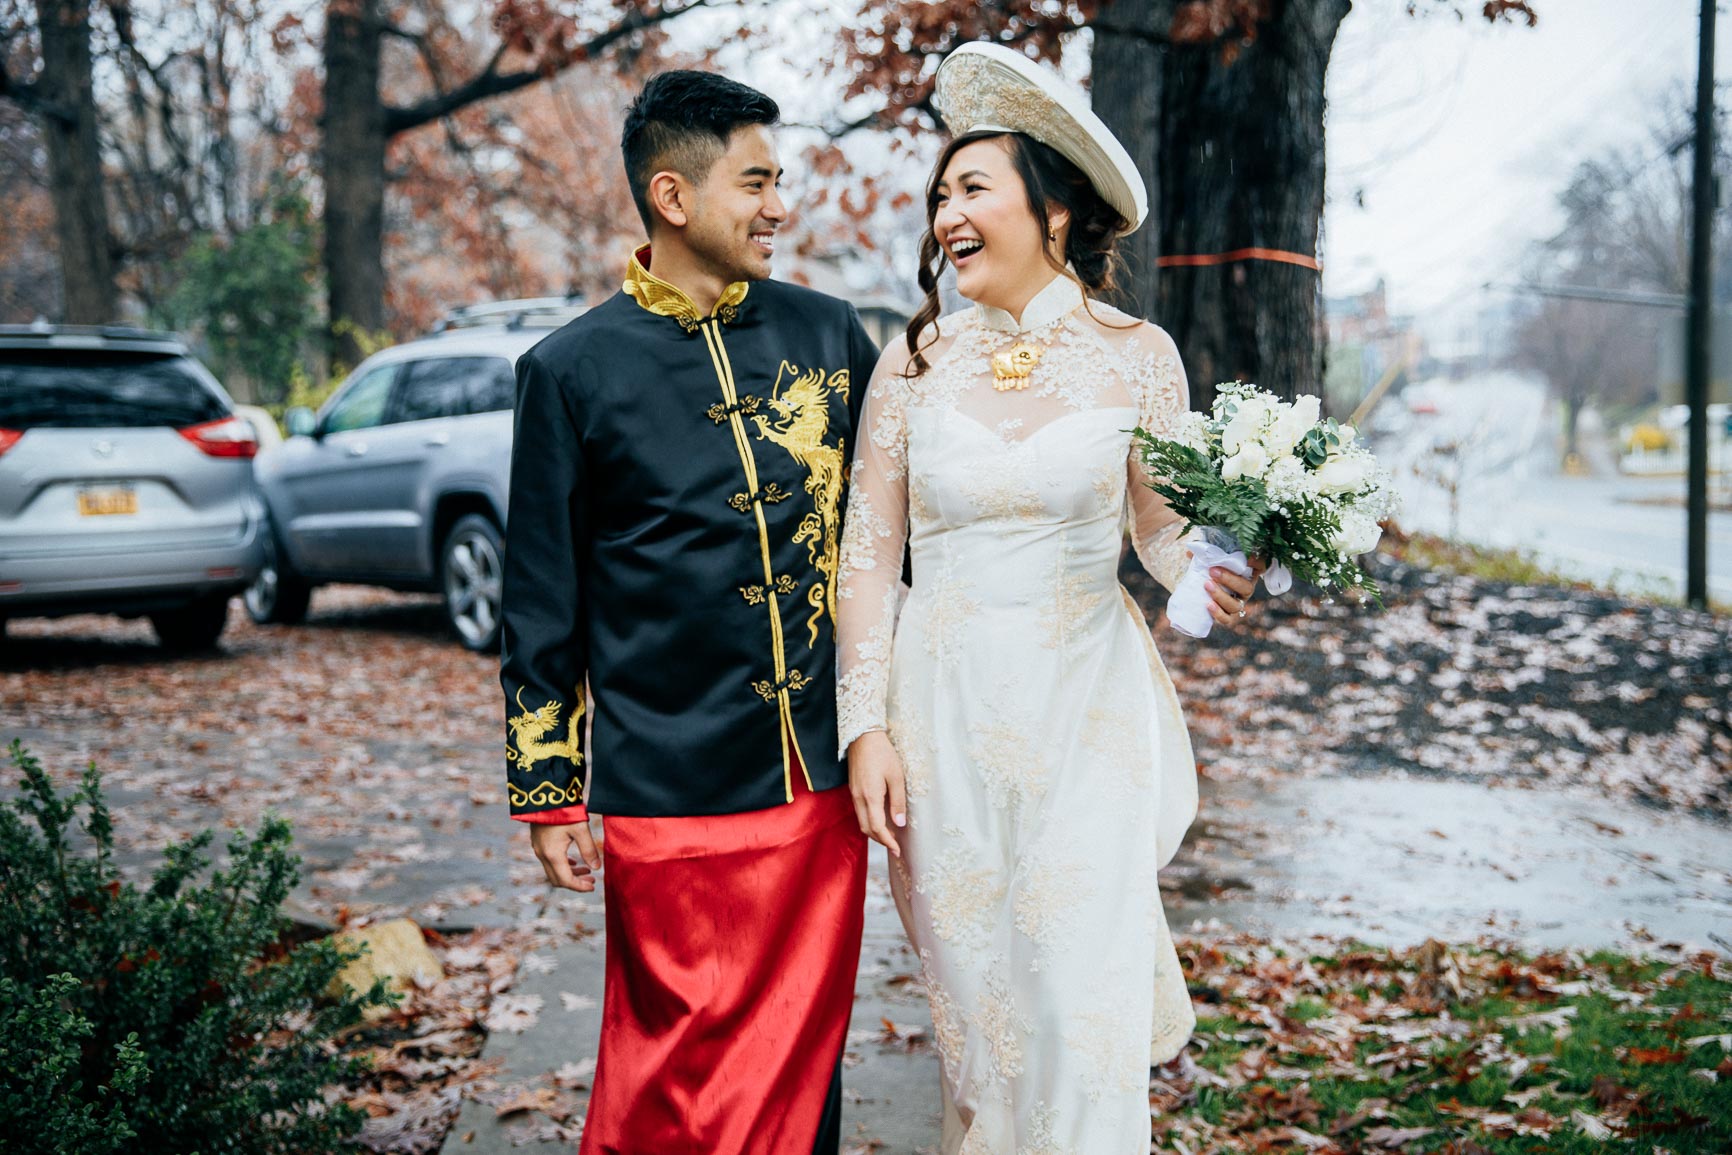 What you're paying for wedding photography, vietnamese weddings in charlotte nc, chinese weddings in charlotte nc, cultural wedding photographer, charlotte wedding photographer, cultural wedding ceremony, nhieu tang photography